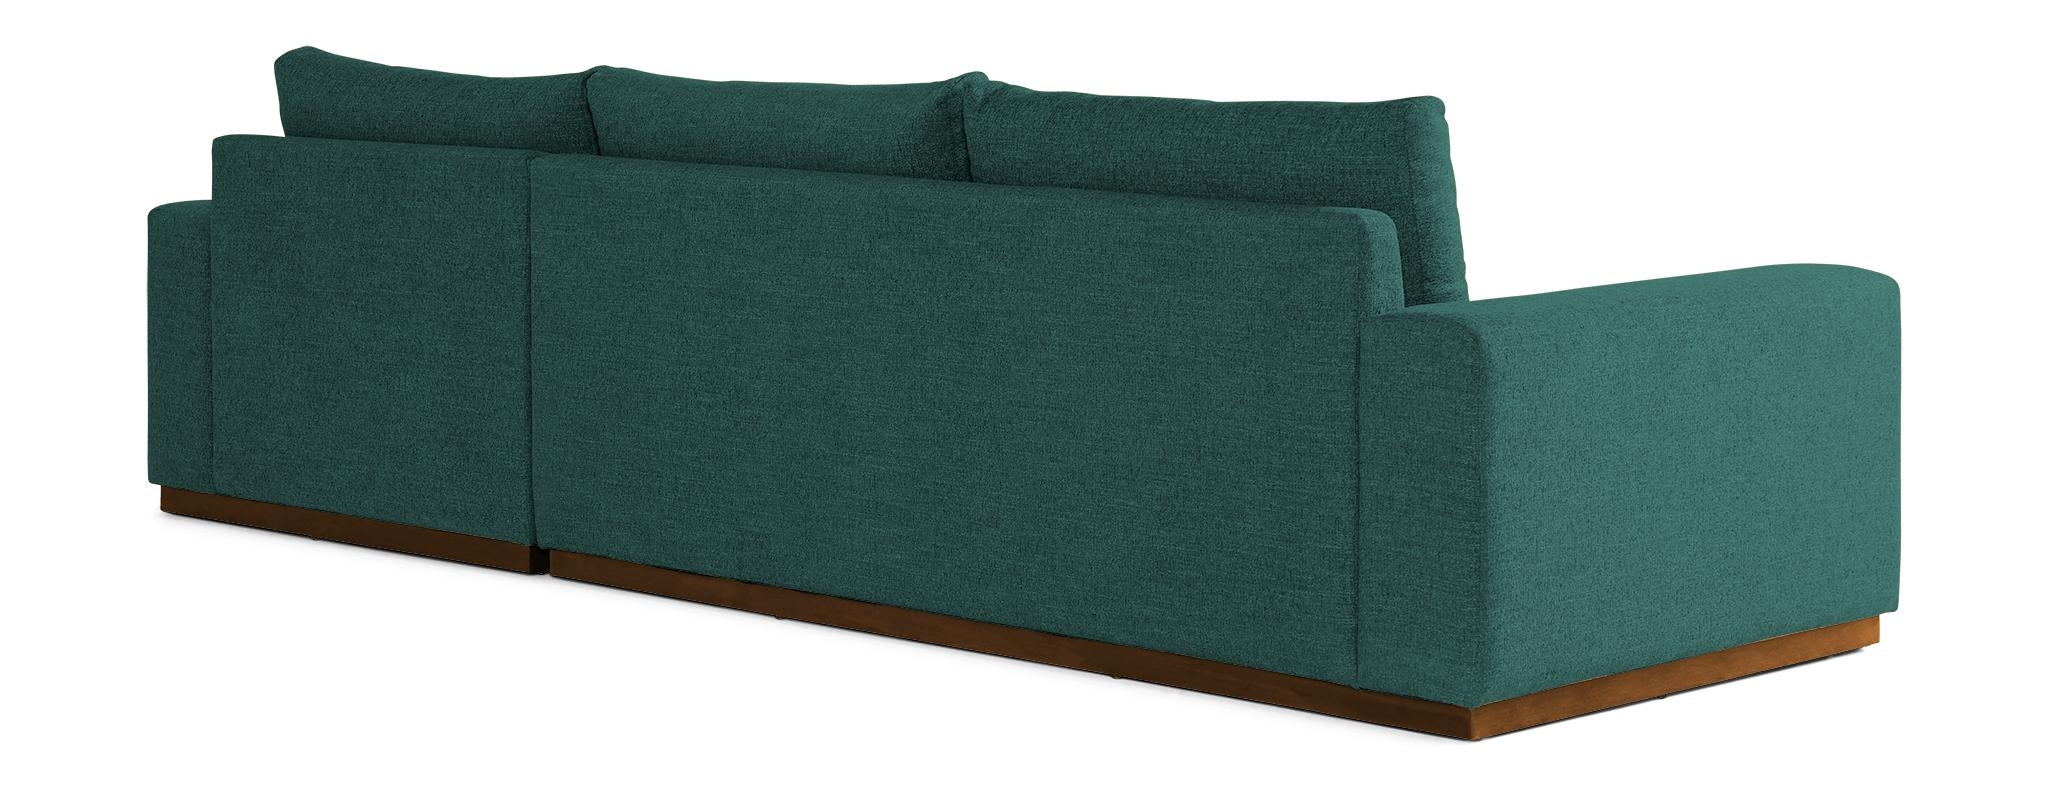 Blue Holt Mid Century Modern Sectional with Storage - Prime Peacock - Mocha - Left - Image 4